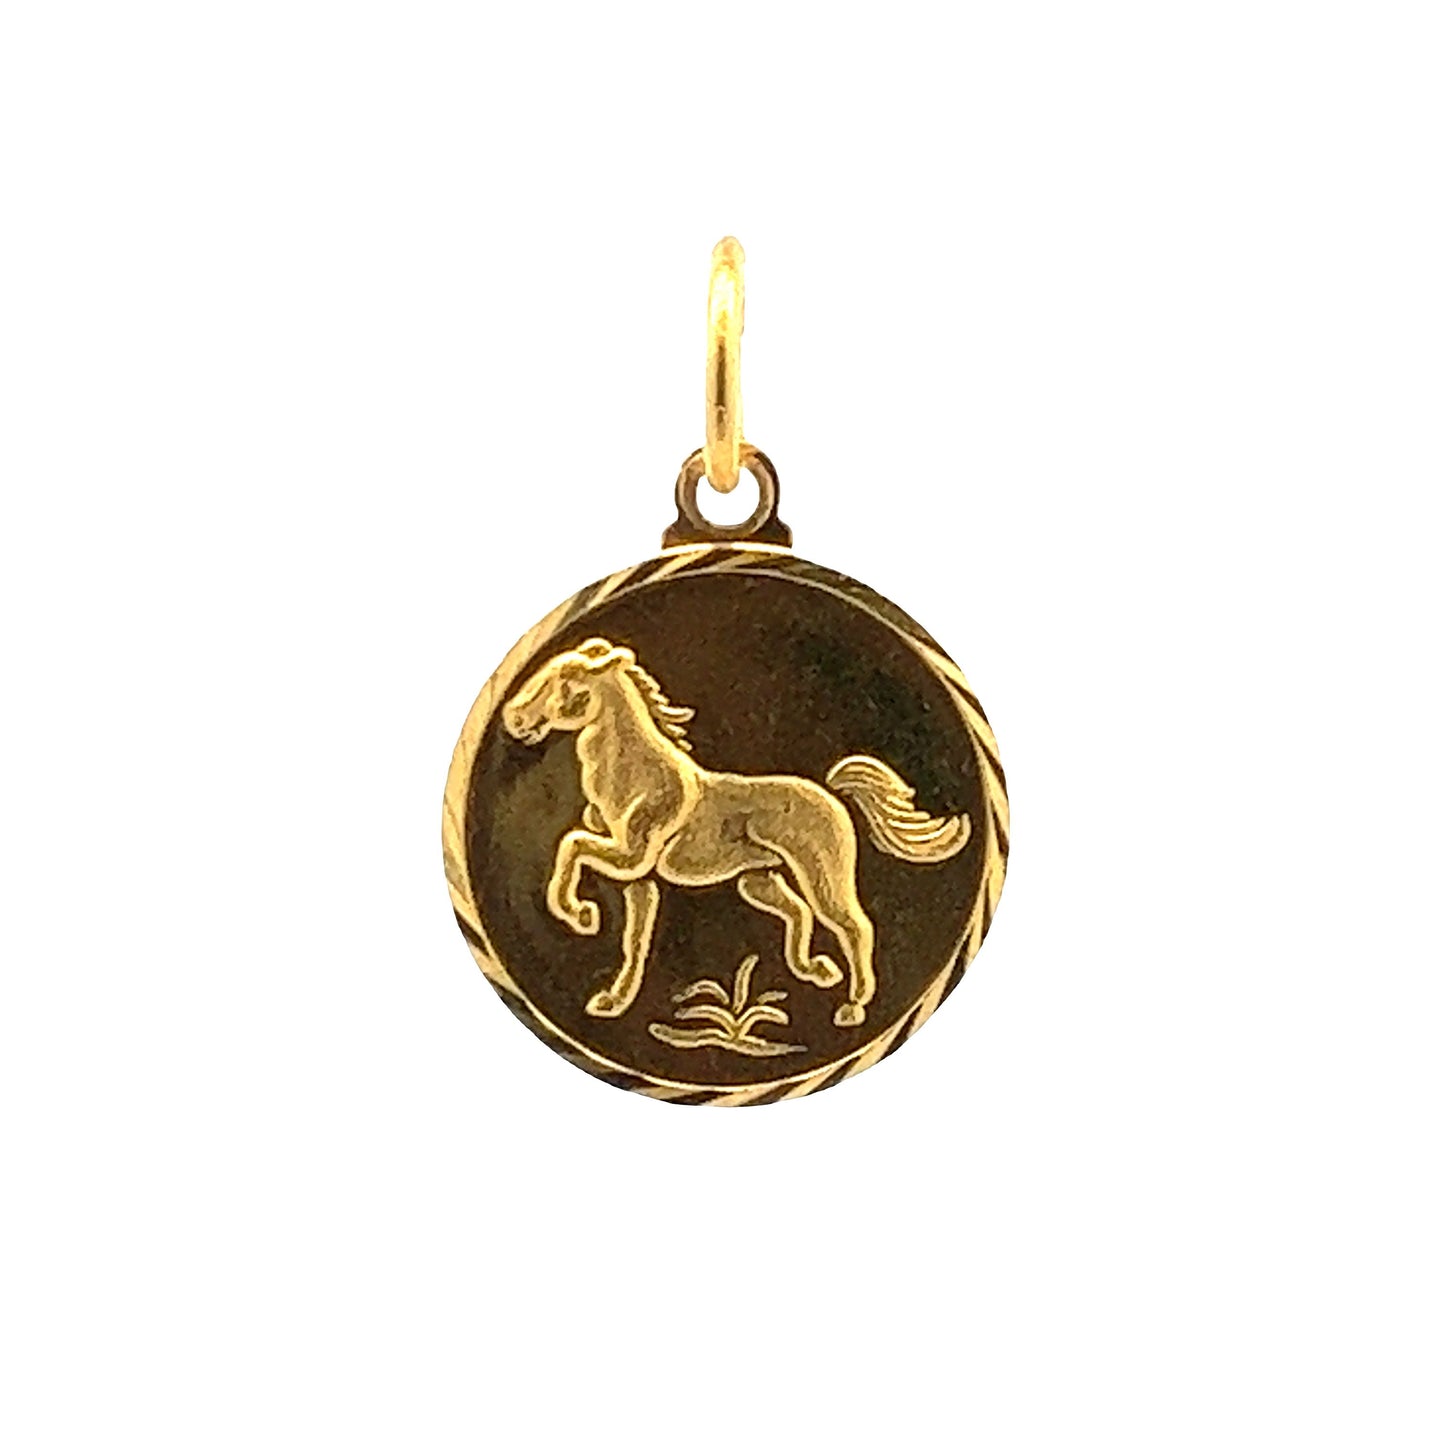 GOLD PENDANT ( 22K ) ( 1.76g ) - 0012510 Chain sold separately